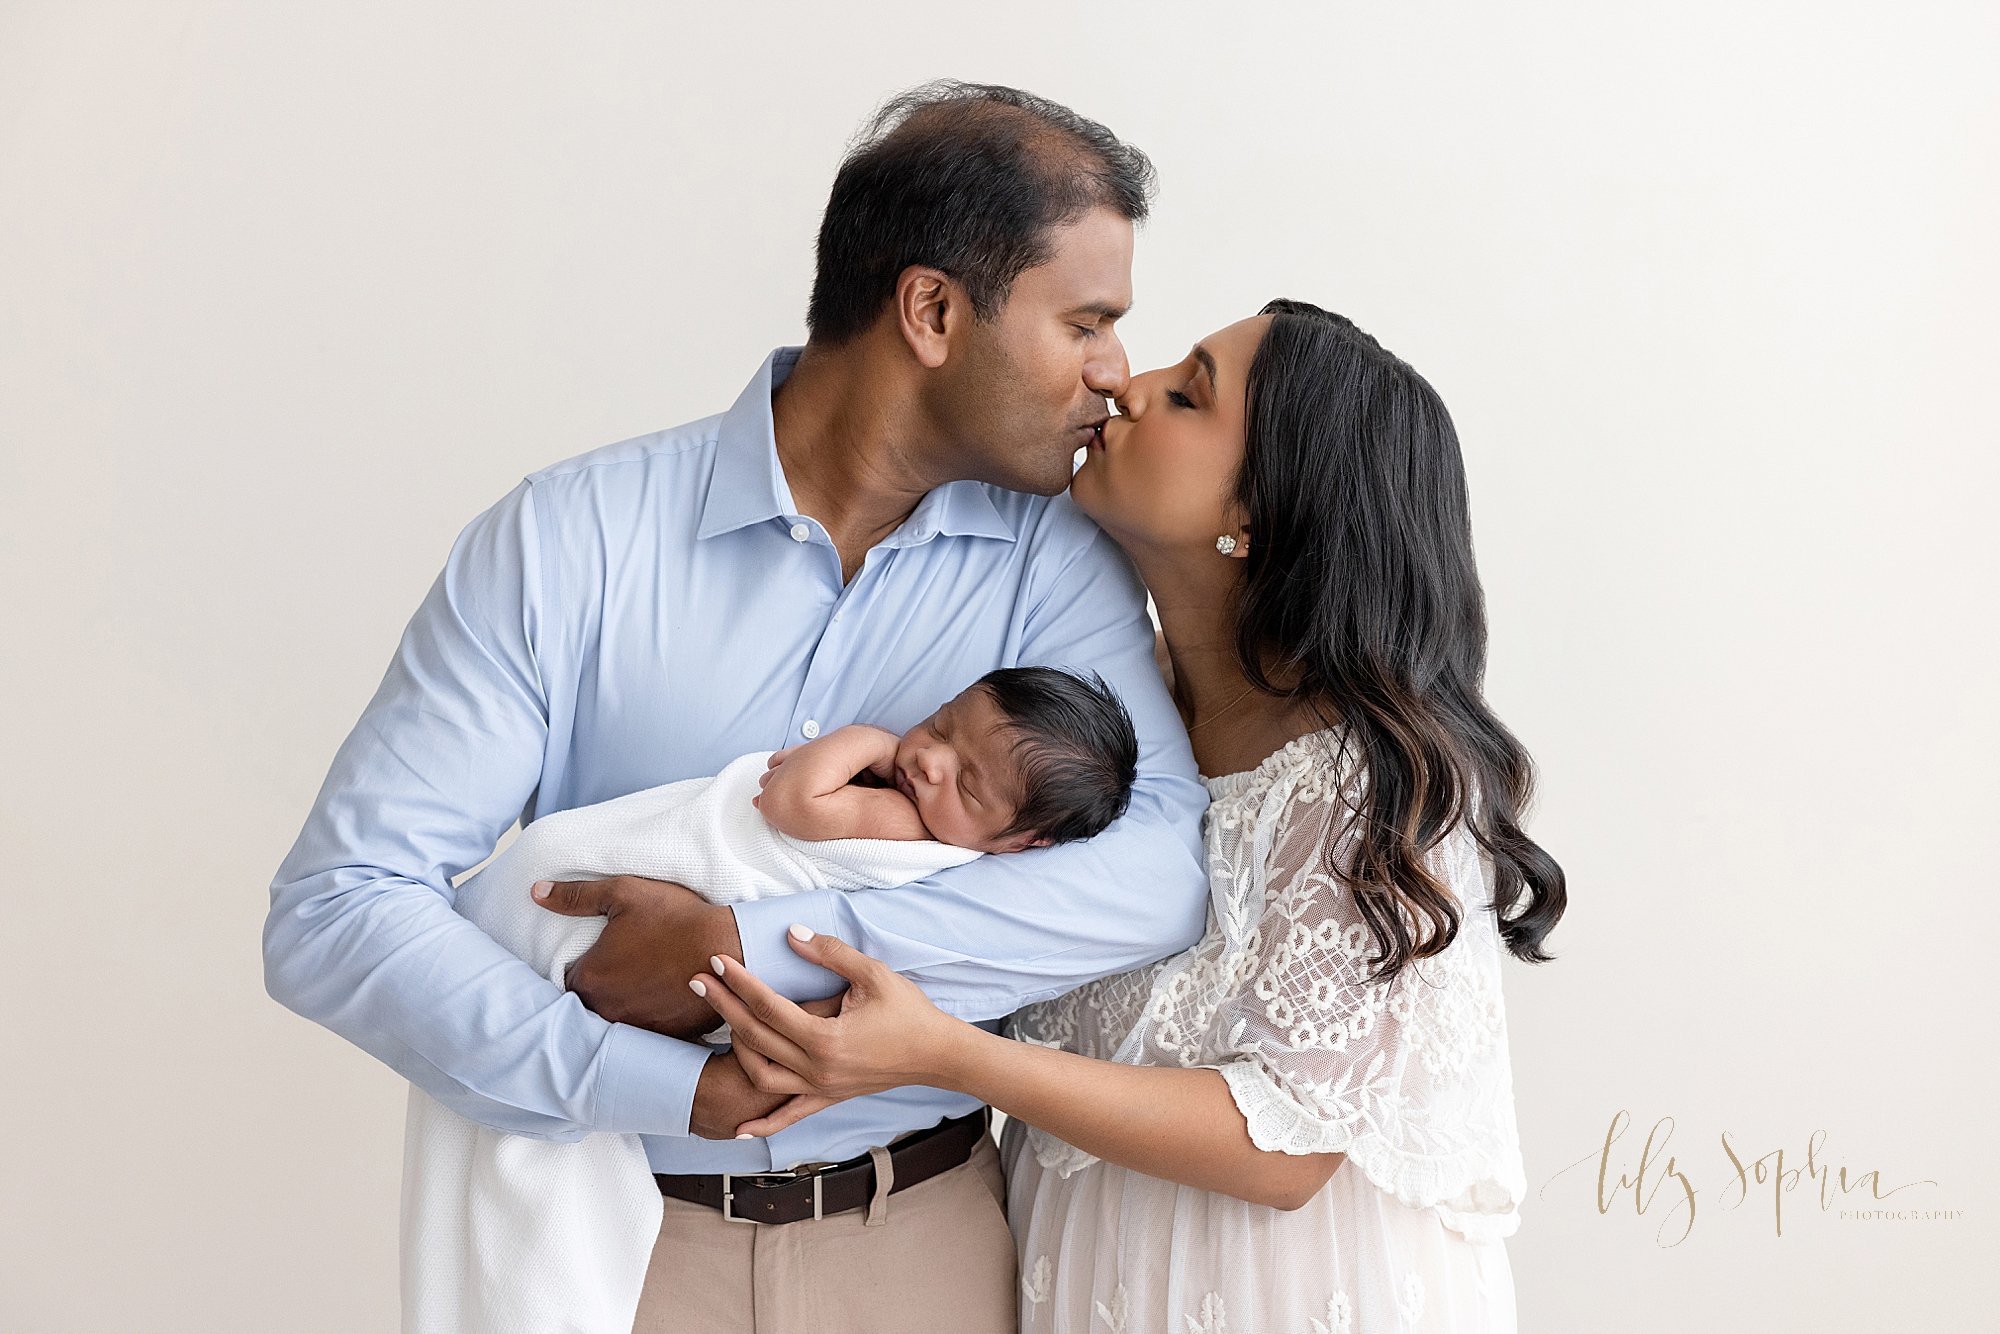  Family newborn photo session with a father cradling his sleeping newborn baby boy in his arms as he turns his head over his left shoulder to kiss his wife who is standing next to him taken in natural light in a studio near Virginia Highlands in Atla